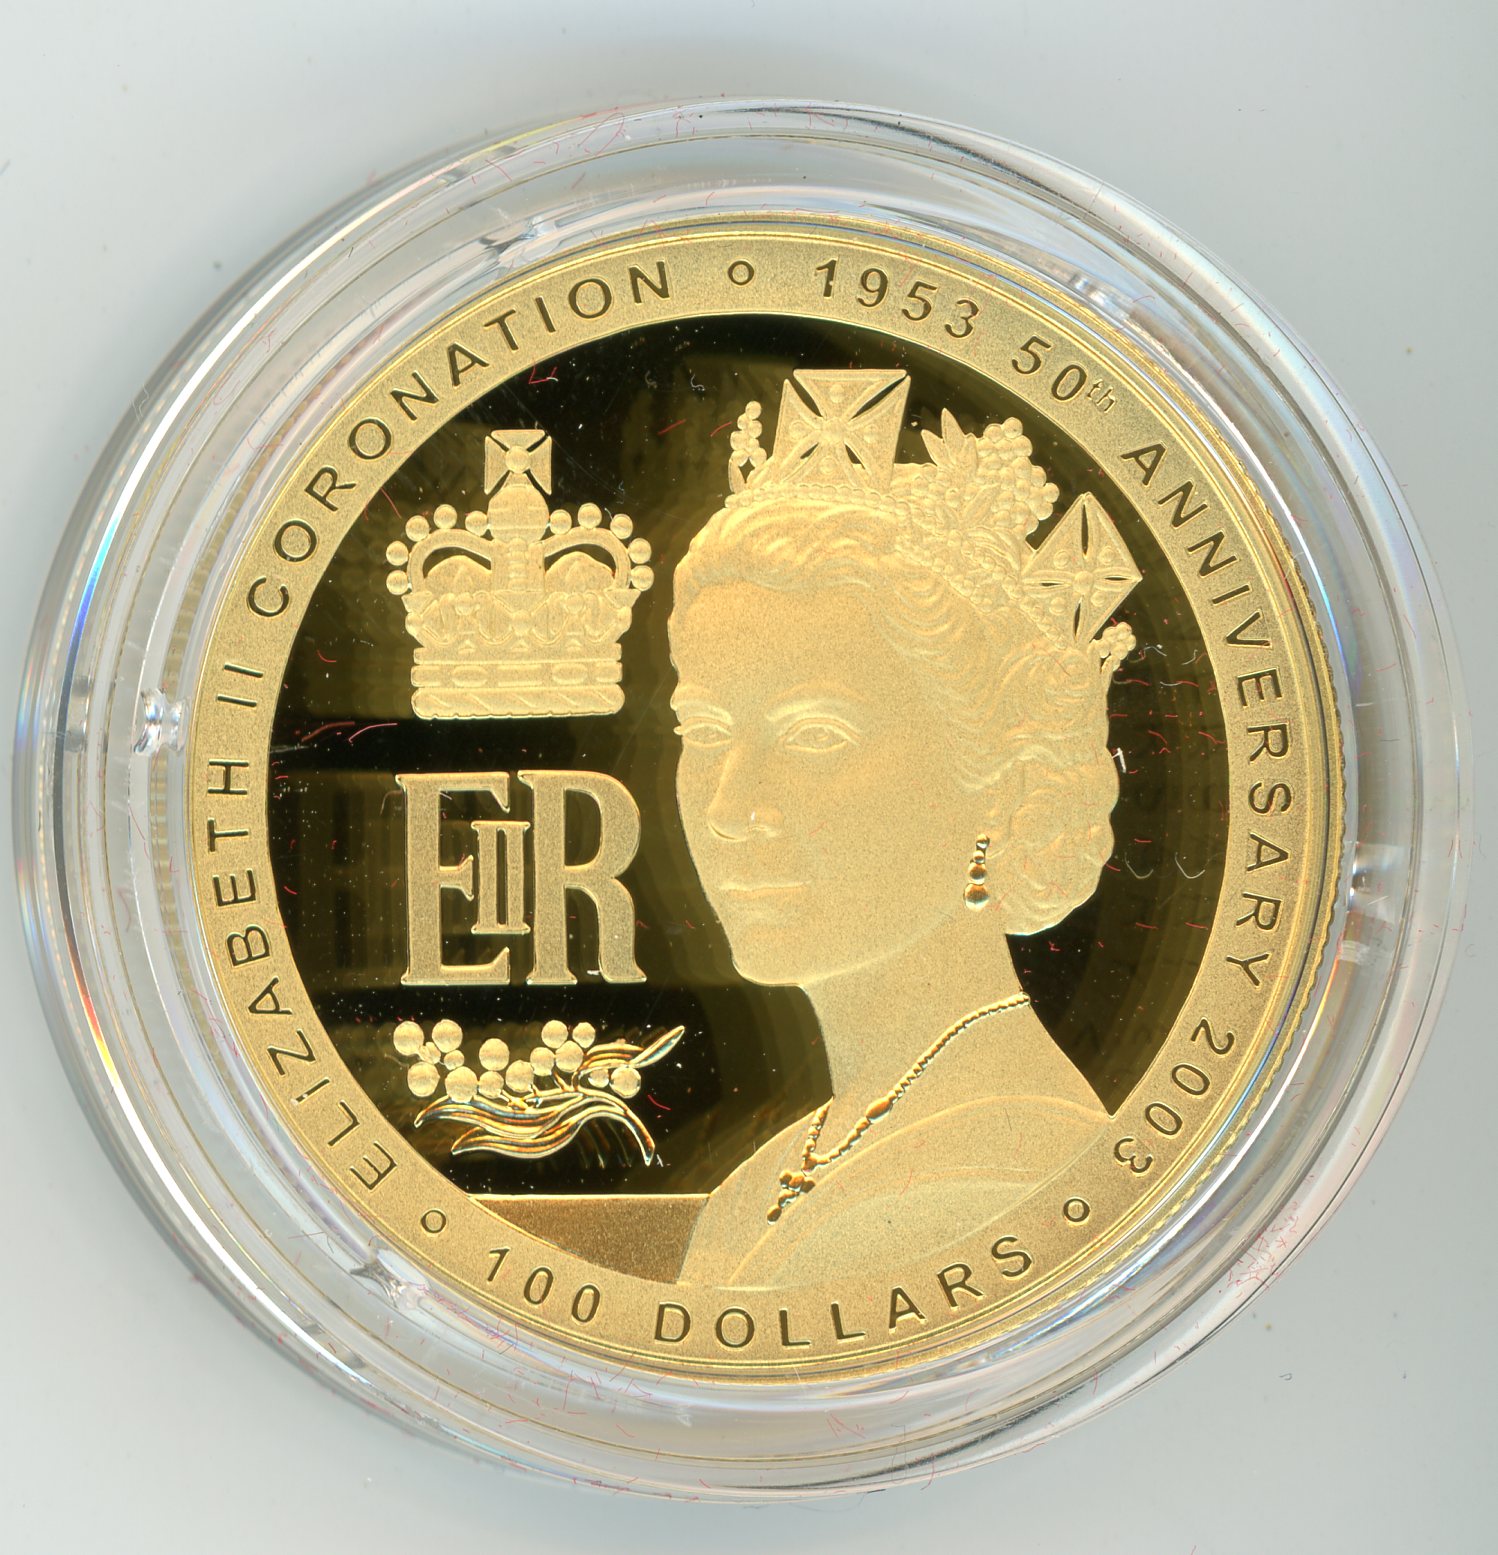 Thumbnail for 2003 Australian 1oz Gold $100.00 Coin in capsule only - 50th Anniversary of Coronation